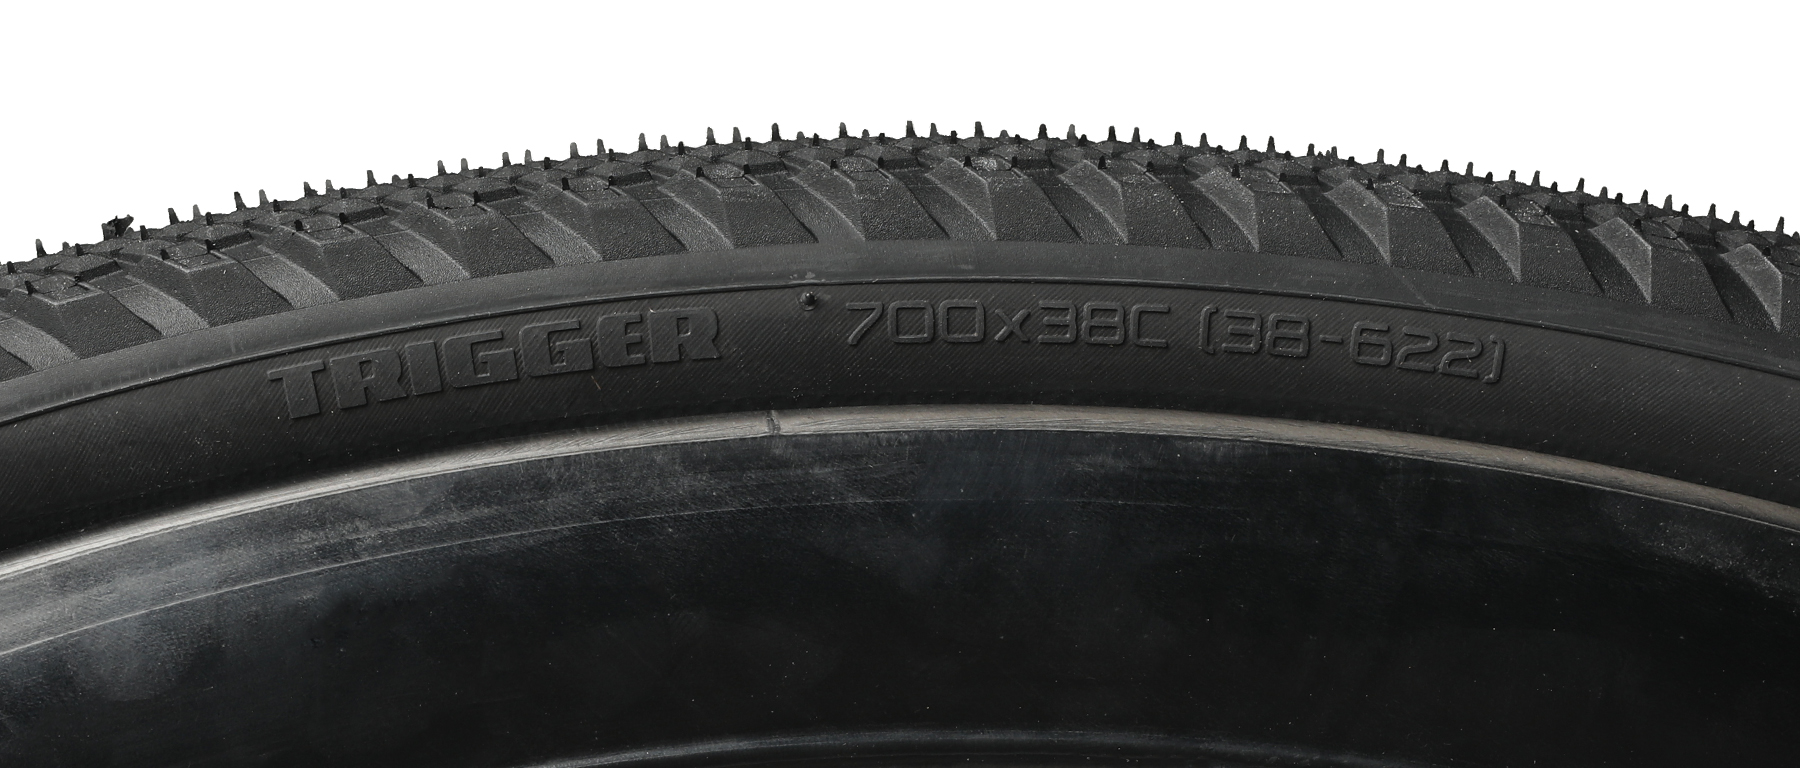 Specialized Trigger Pro 2Bliss Gravel Tire